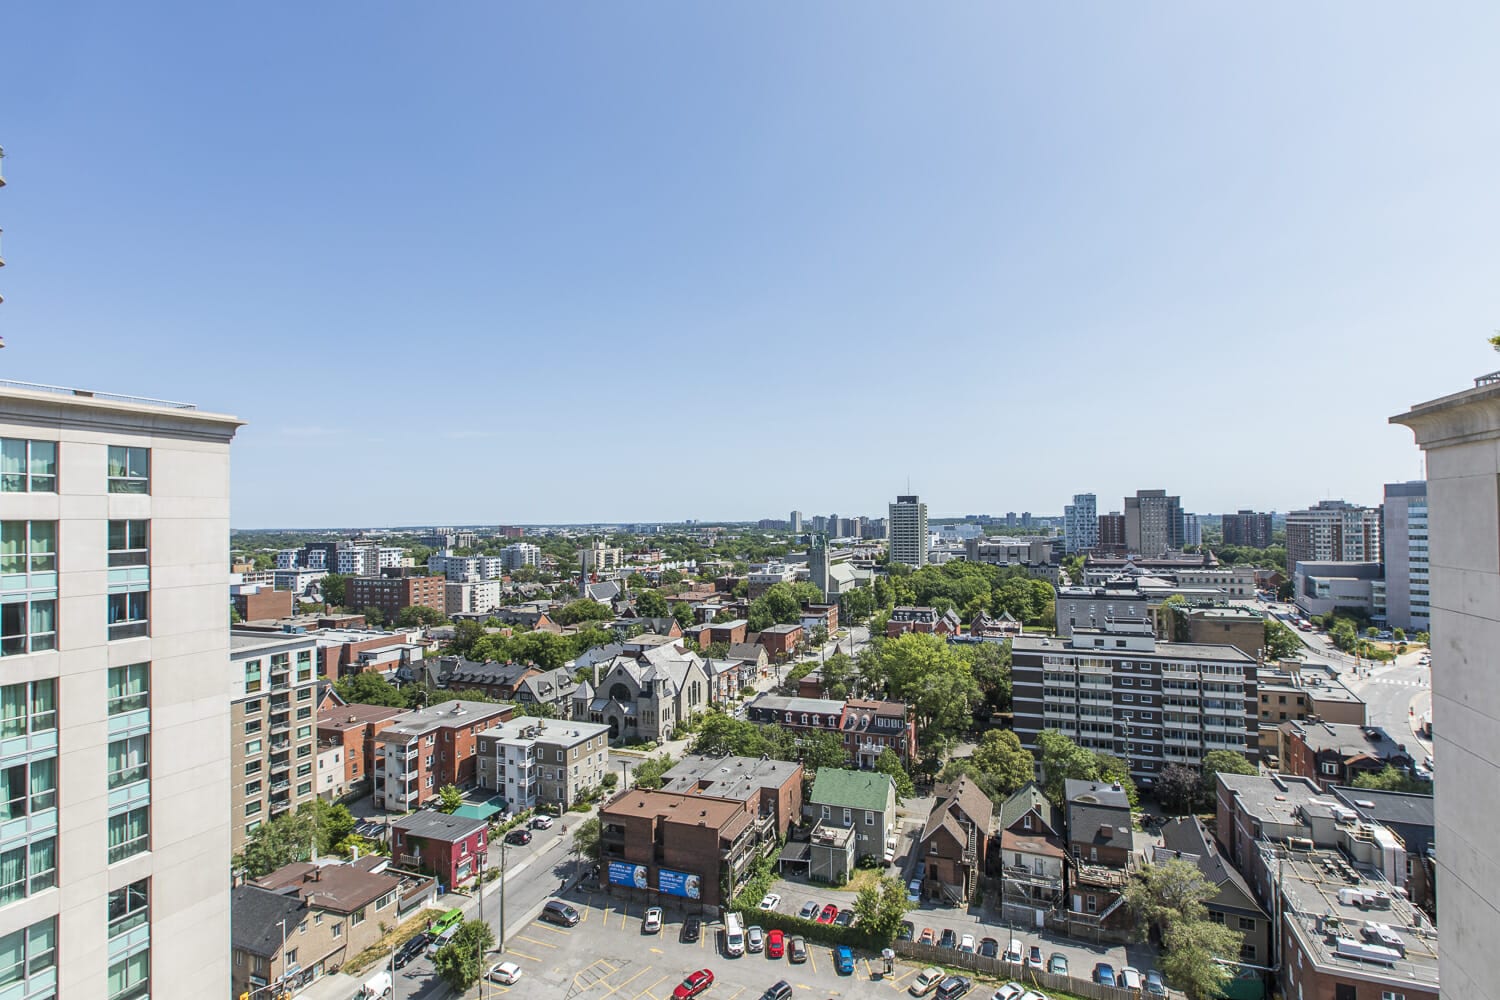 re you considering investing in real estate? Here are 6 reasons you should consider purchasing an investment property in Ottawa.